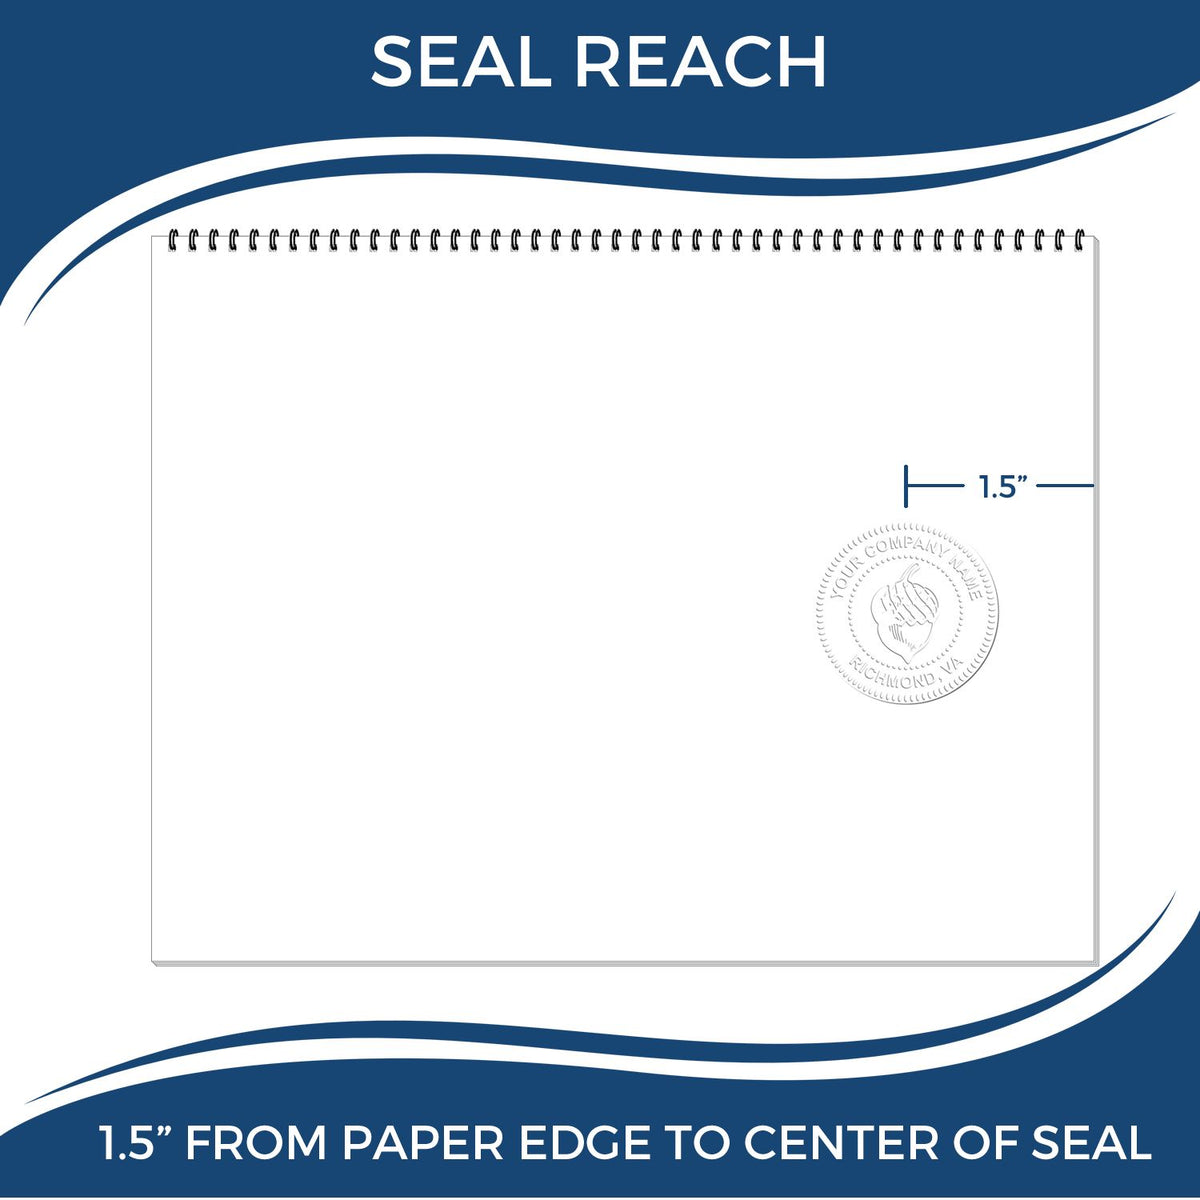 An infographic showing the seal reach which is represented by a ruler and a miniature seal image of the Soft Pocket Connecticut Landscape Architect Embosser